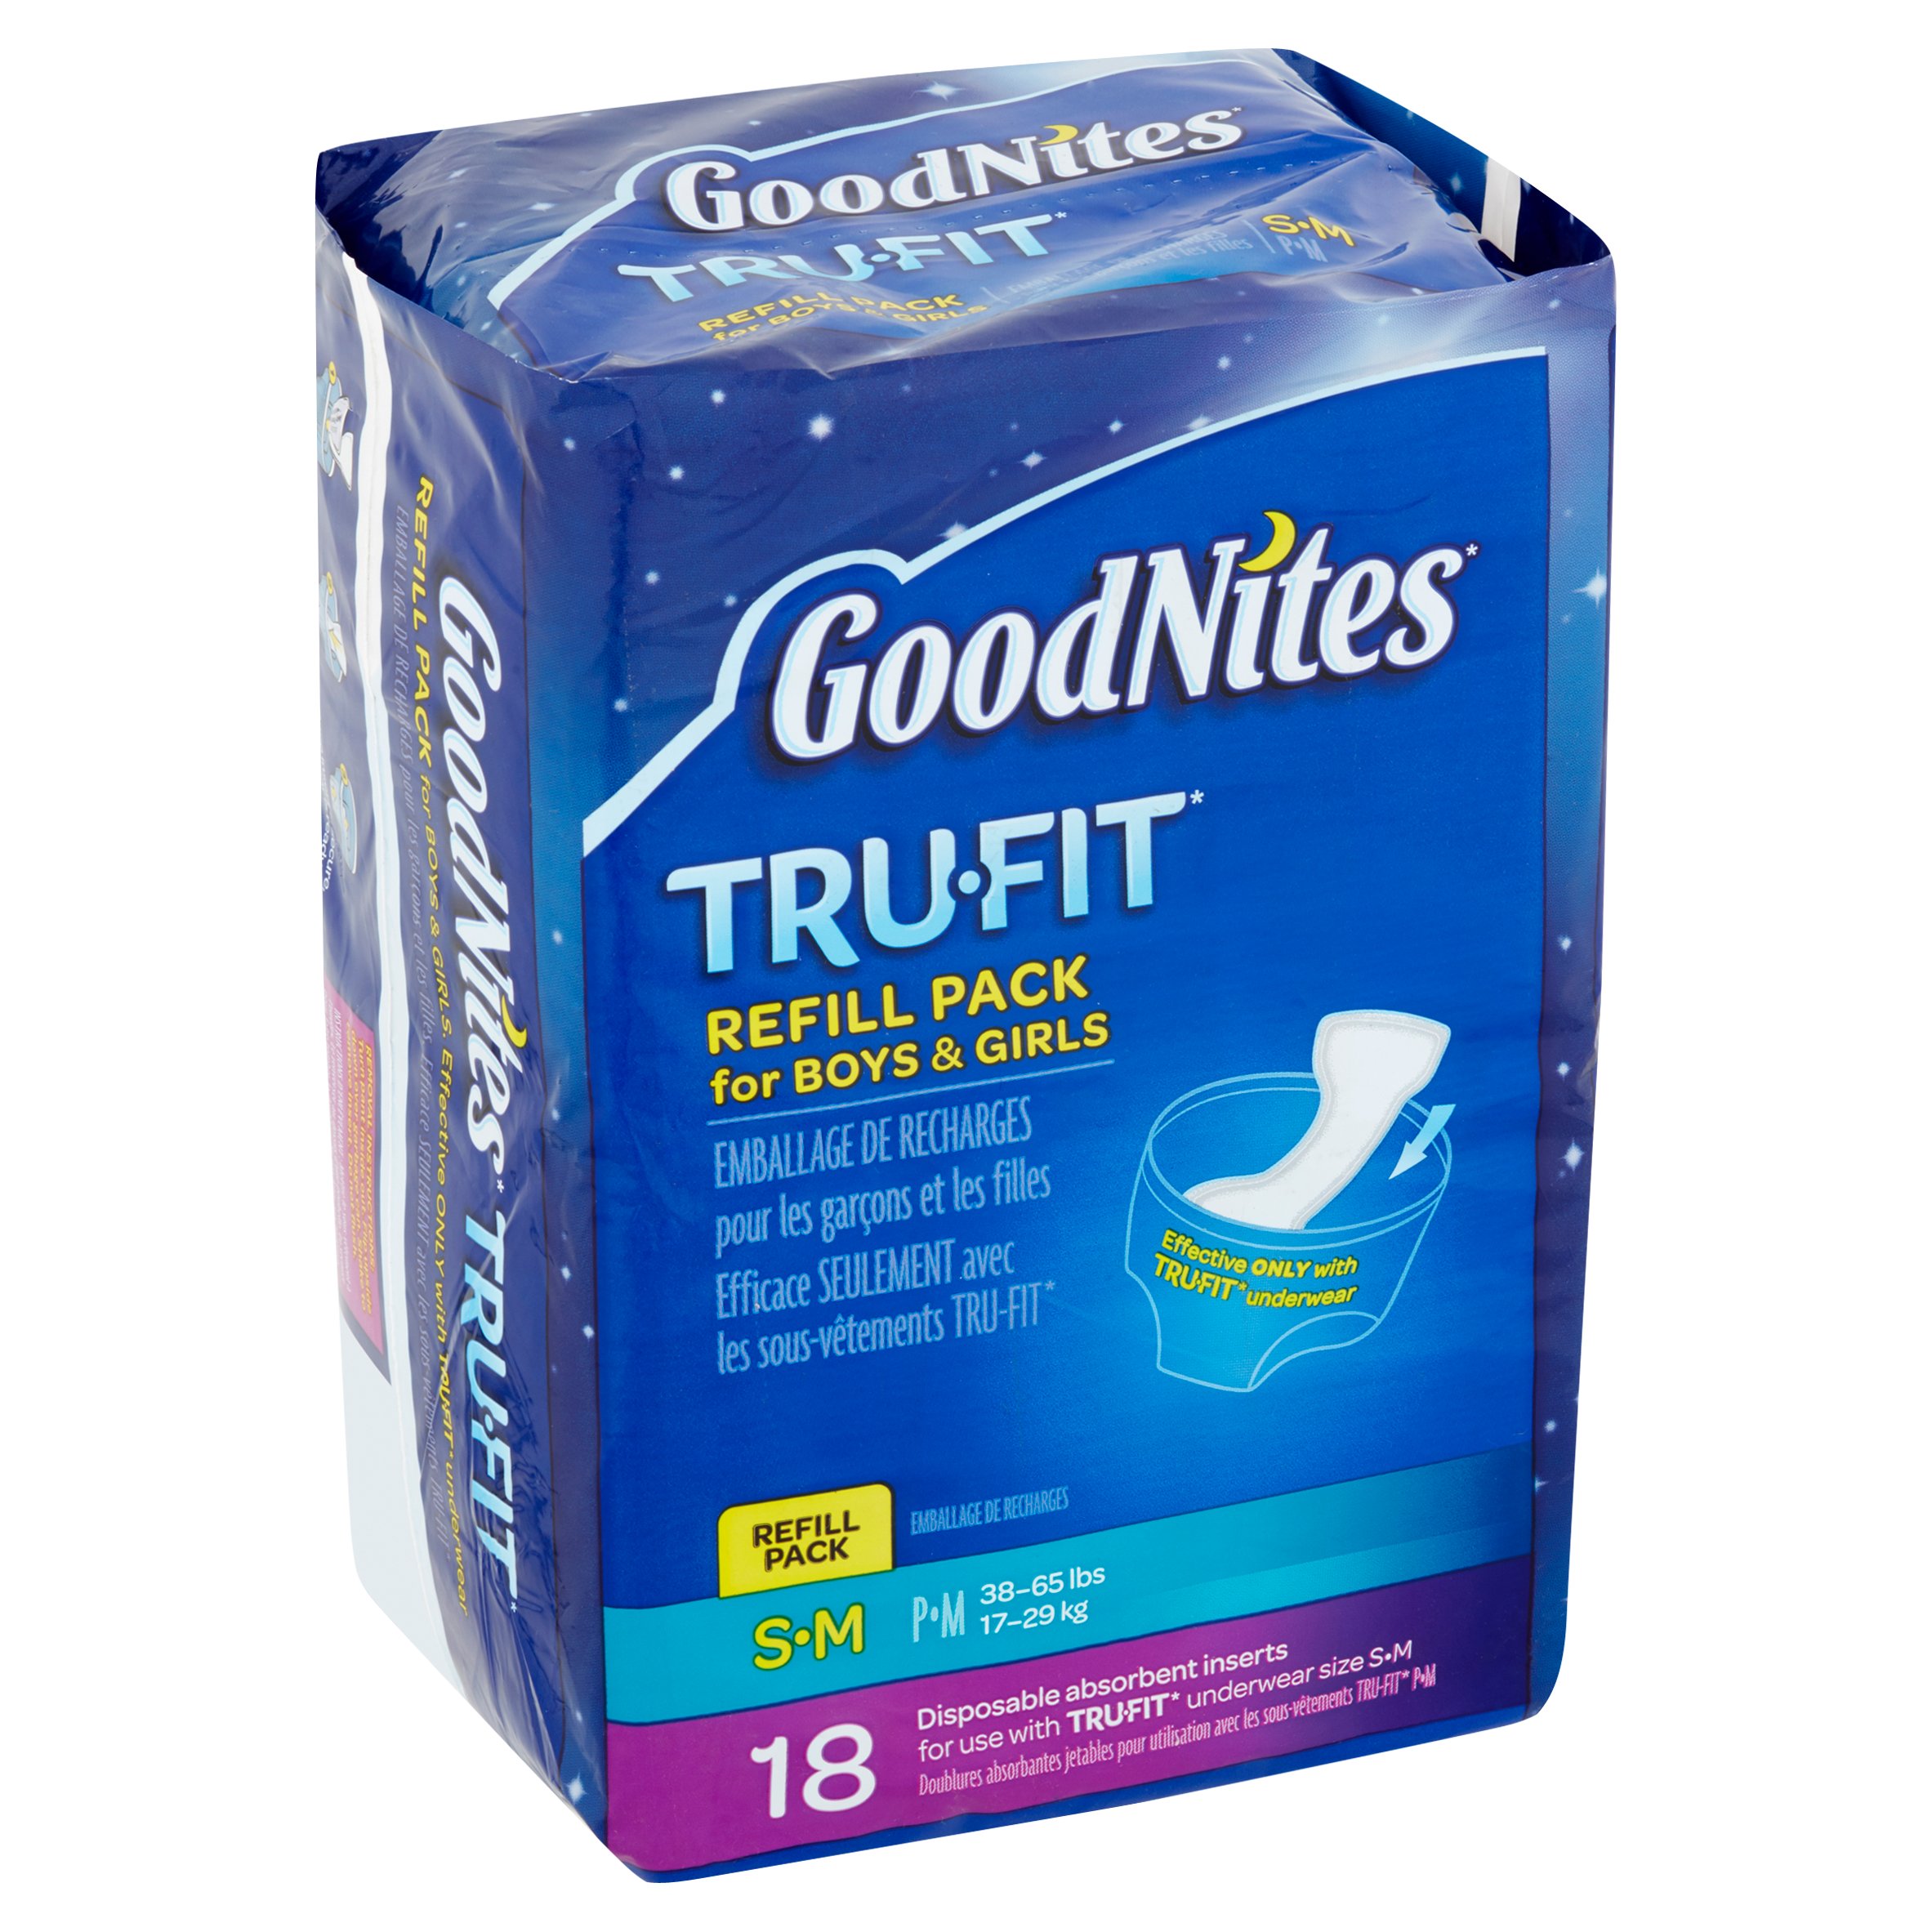 GoodNites TruFit Disposable Absorbent Inserts for Boys & Girls Refill Pack - image 3 of 8